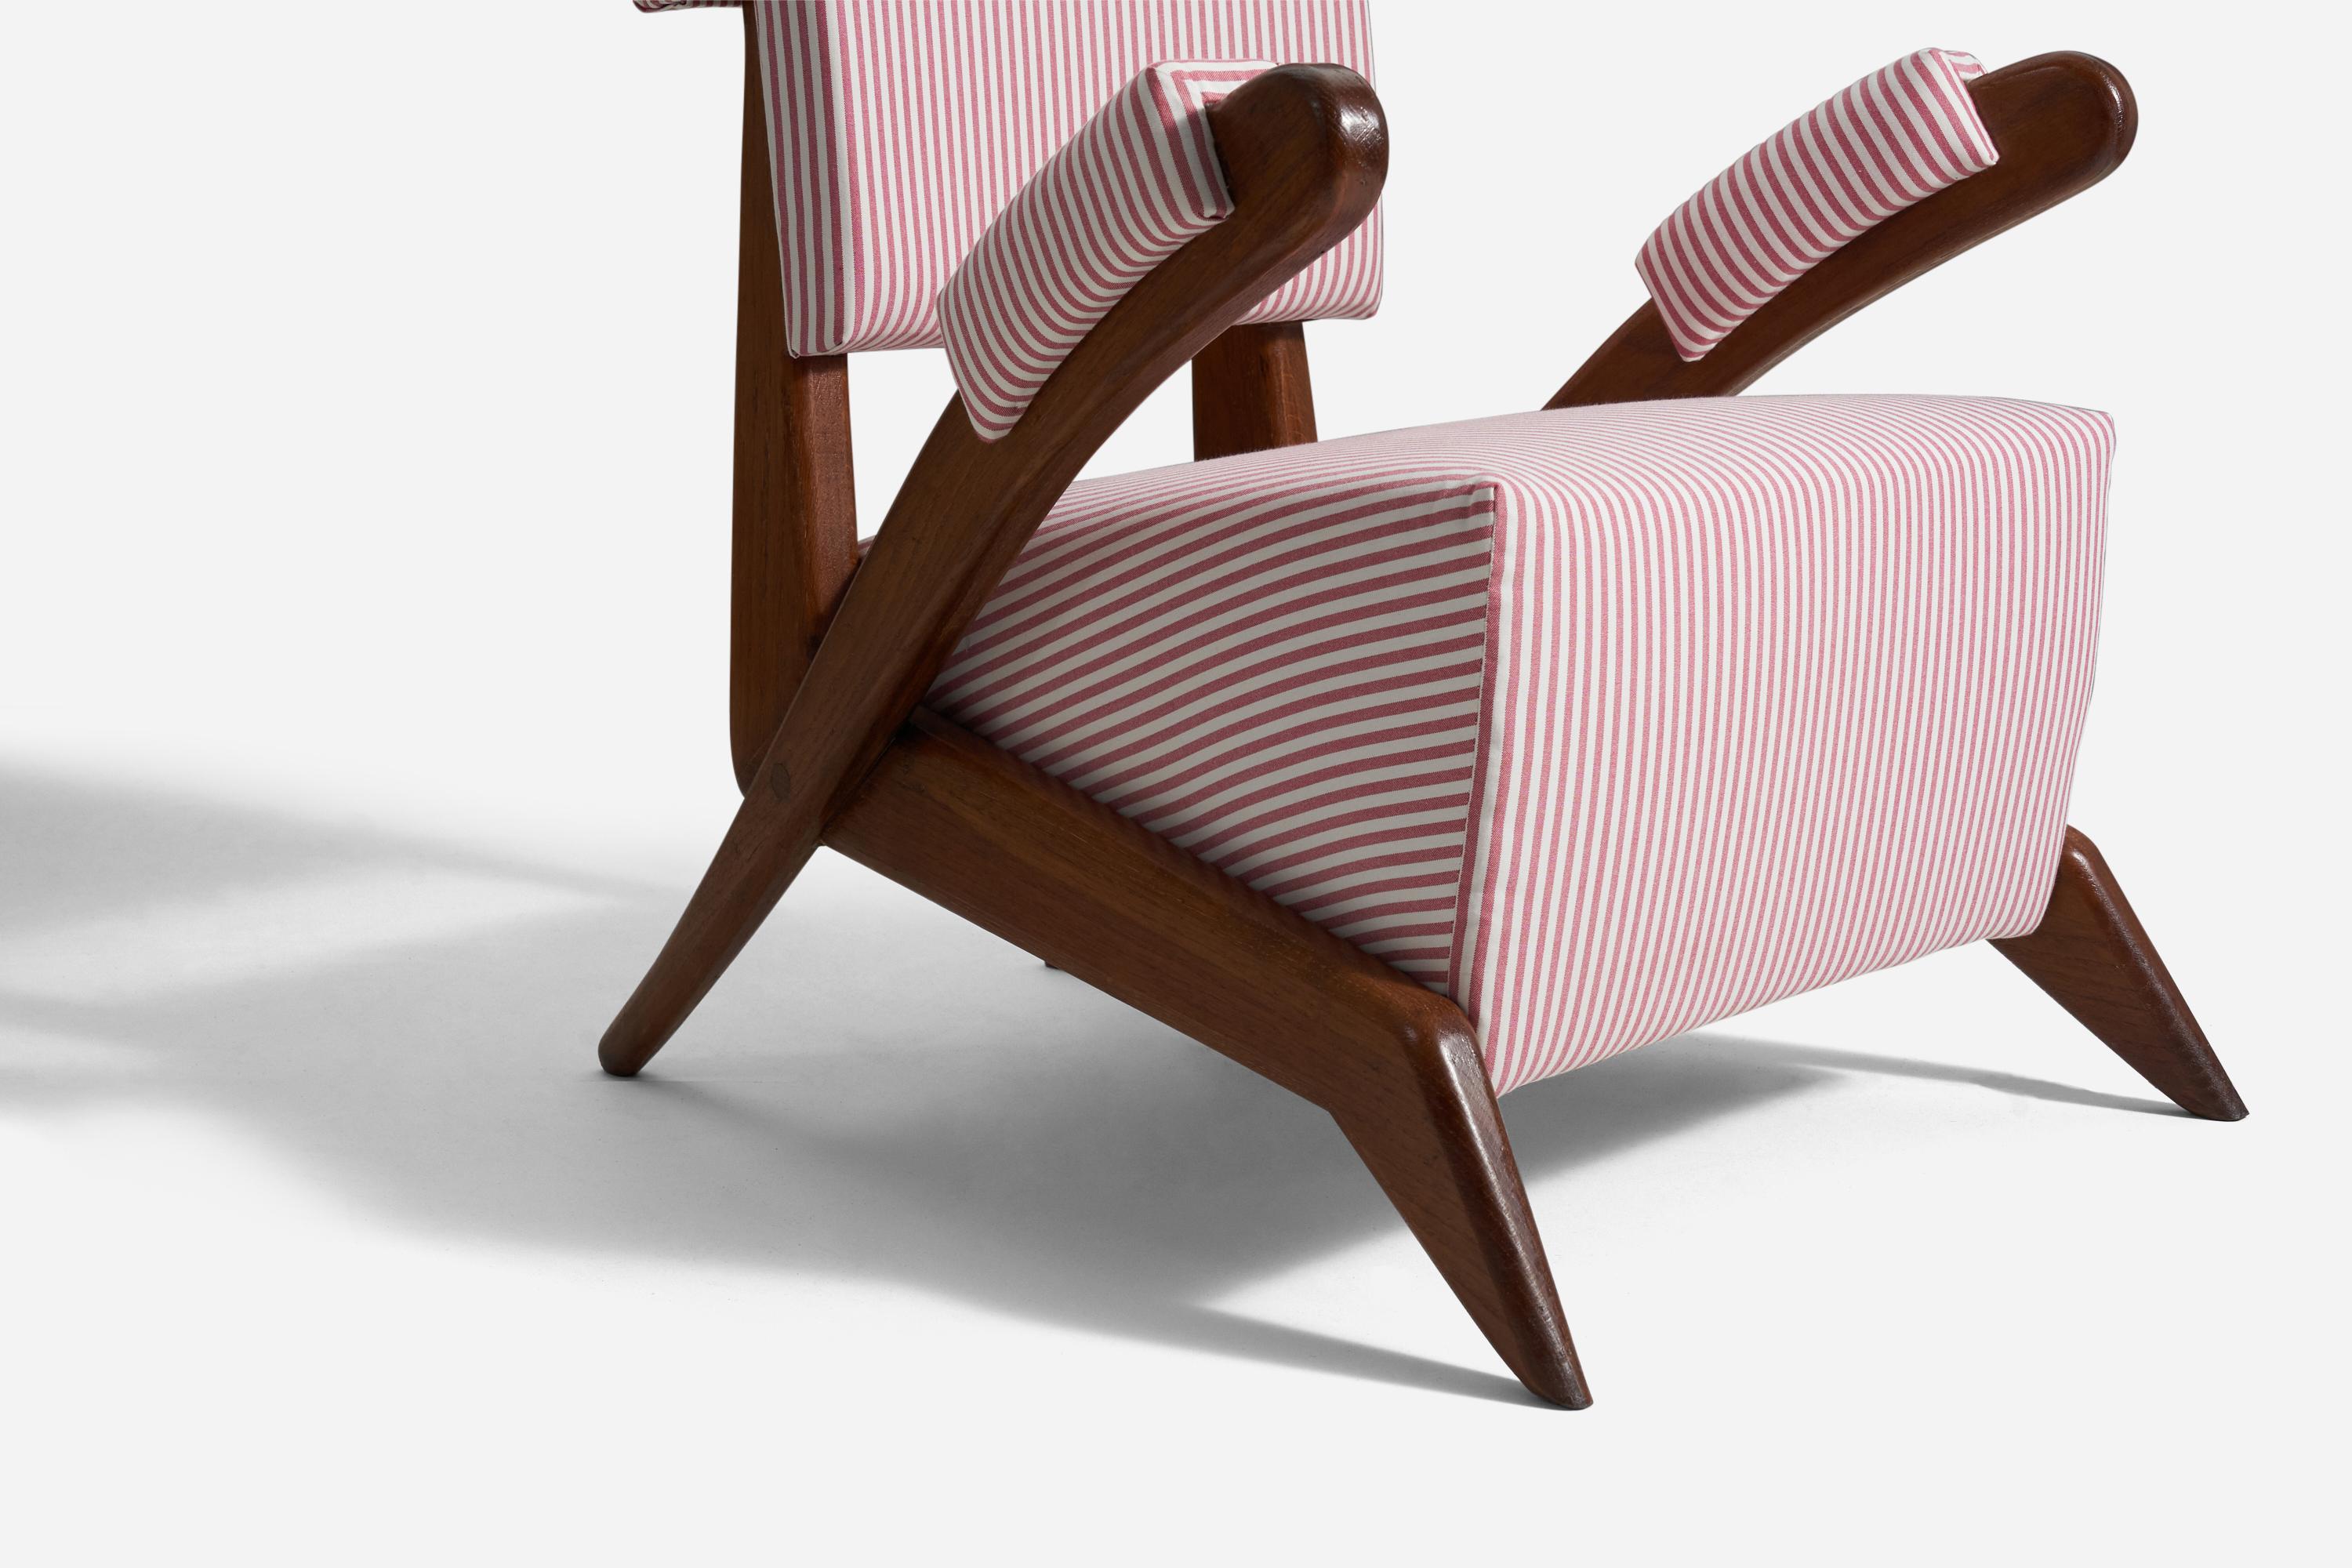 Tino De Silva, Rare Lounge Chairs, Cherrywood, Fabric, Italy, c. 1962 In Good Condition For Sale In High Point, NC